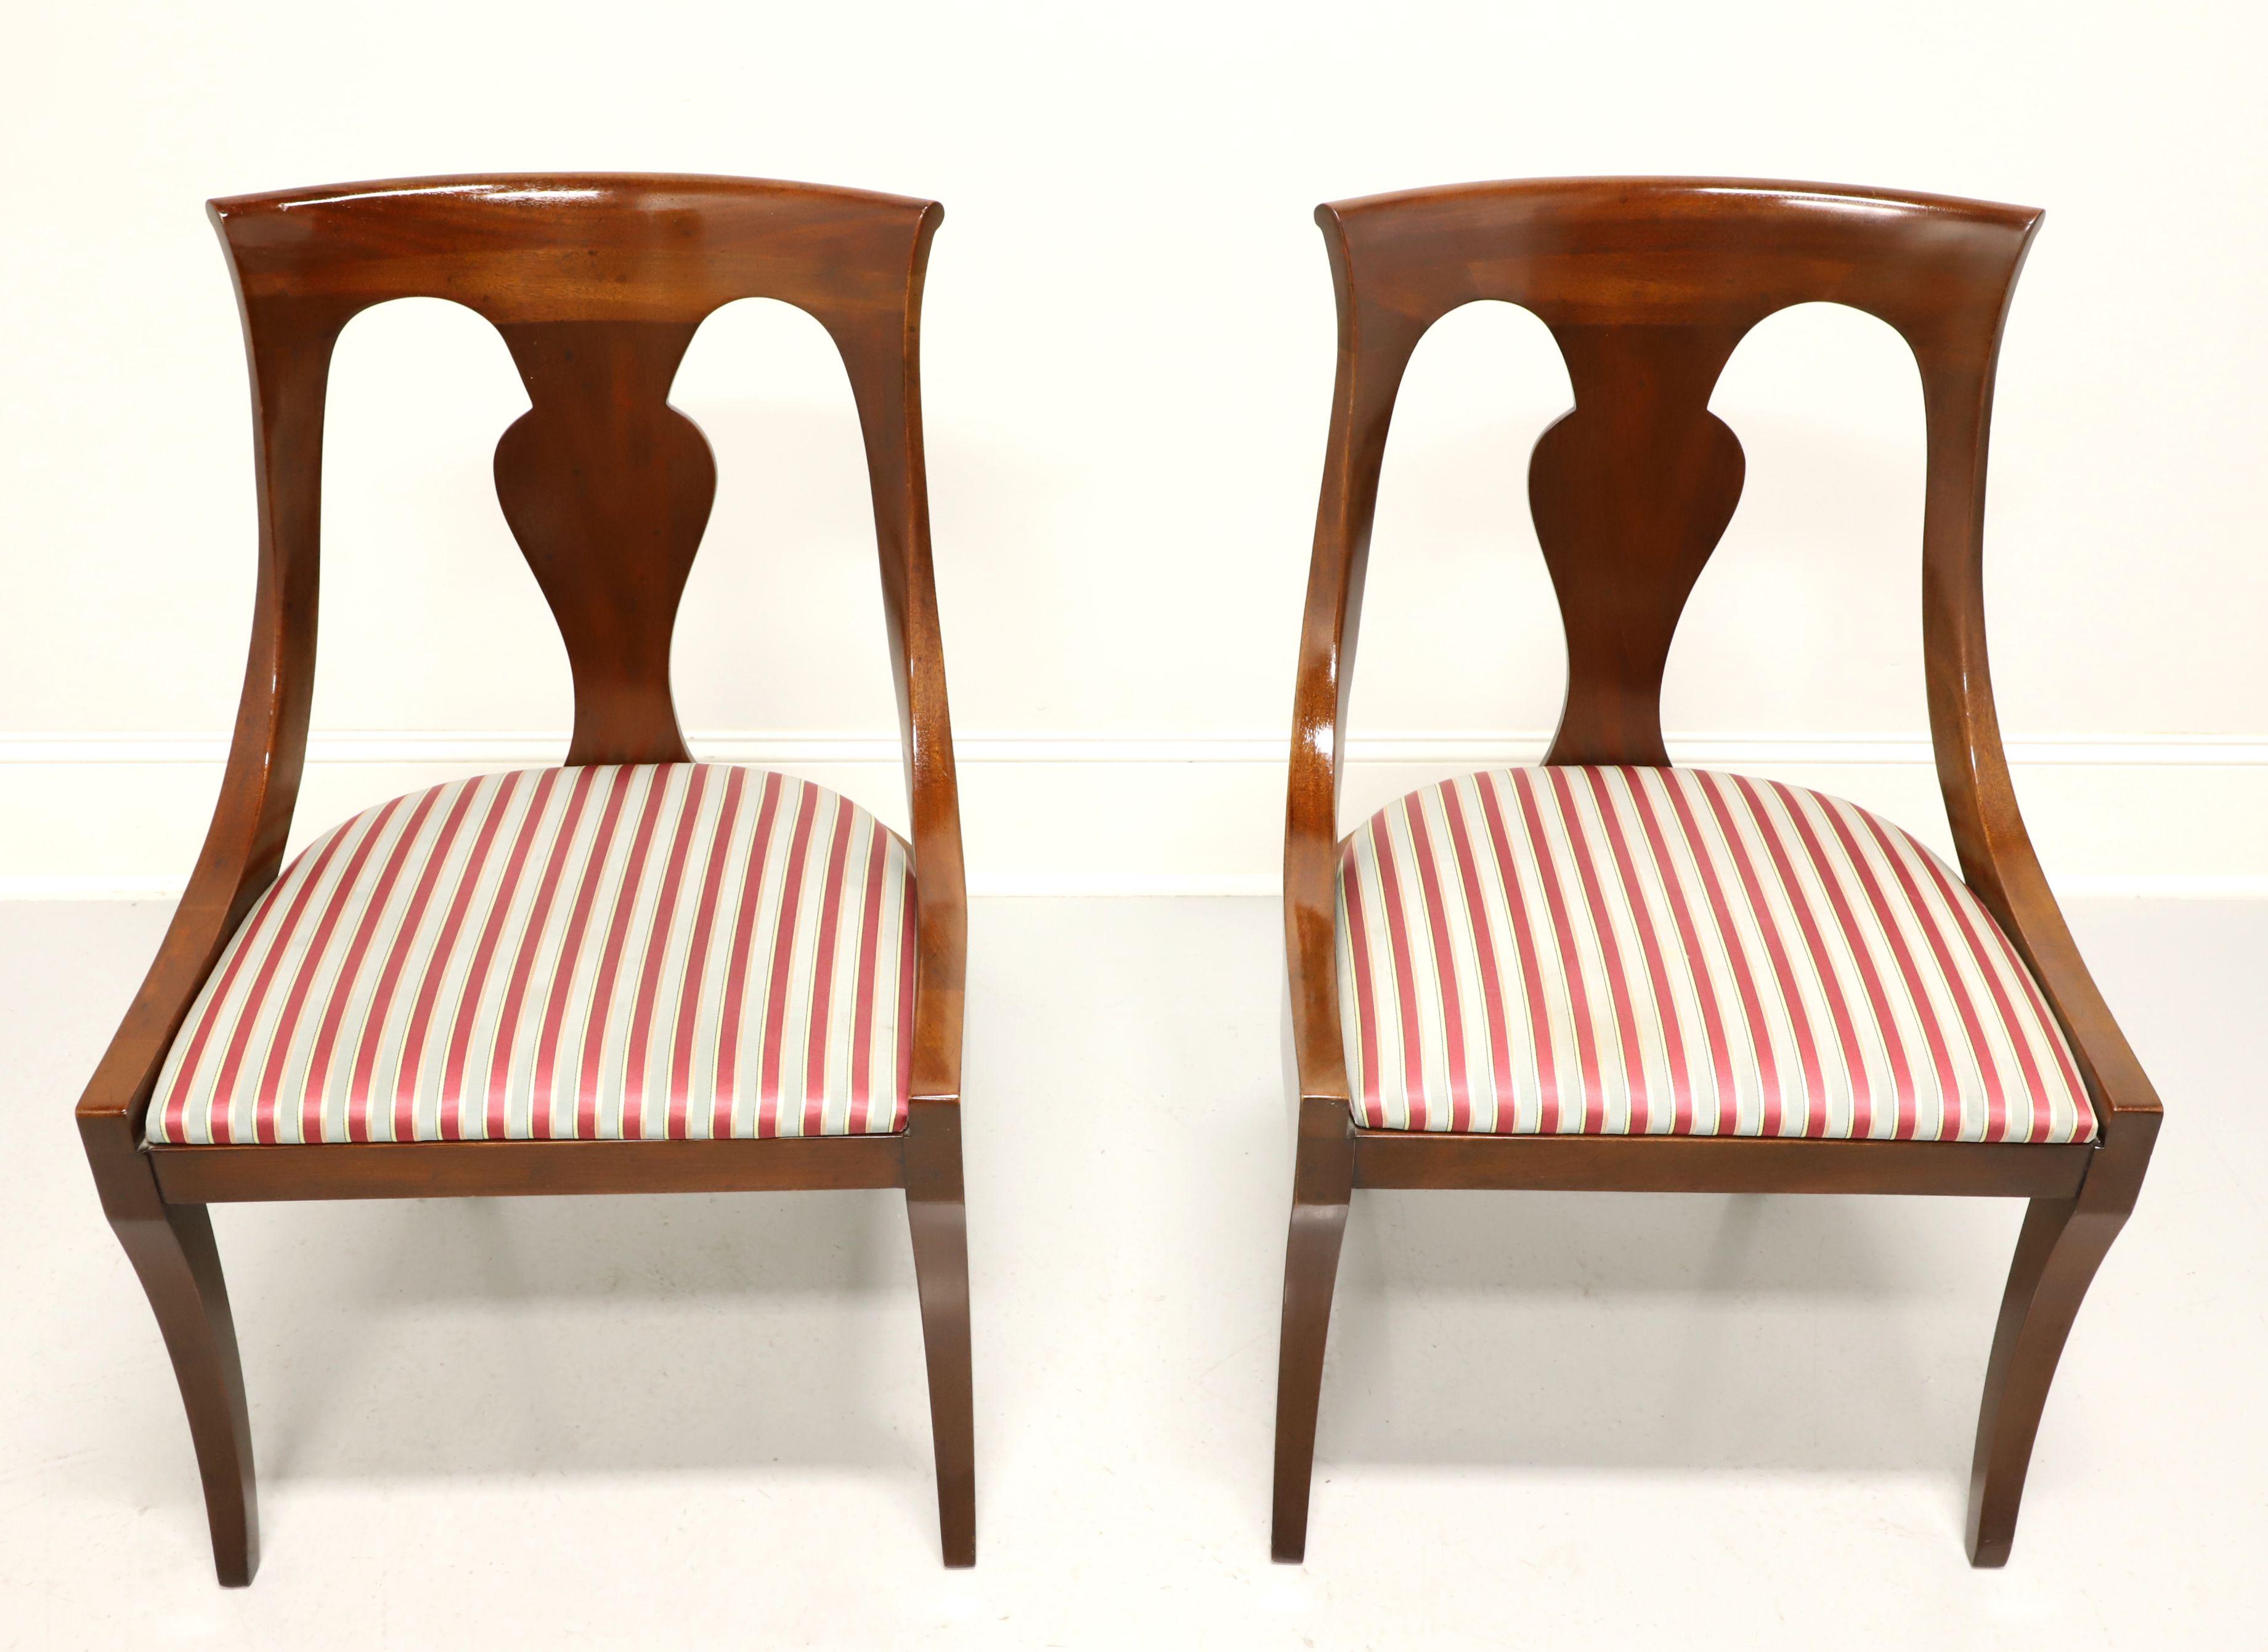 A pair of dining side chairs in the Empire style by Drexel Heritage. Solid mahogany with carved barback crest rail, carved backrest, upholstered seat in a red & silver colored stripe fabric and saber legs. Made in Morganton, North Carolina, USA, in